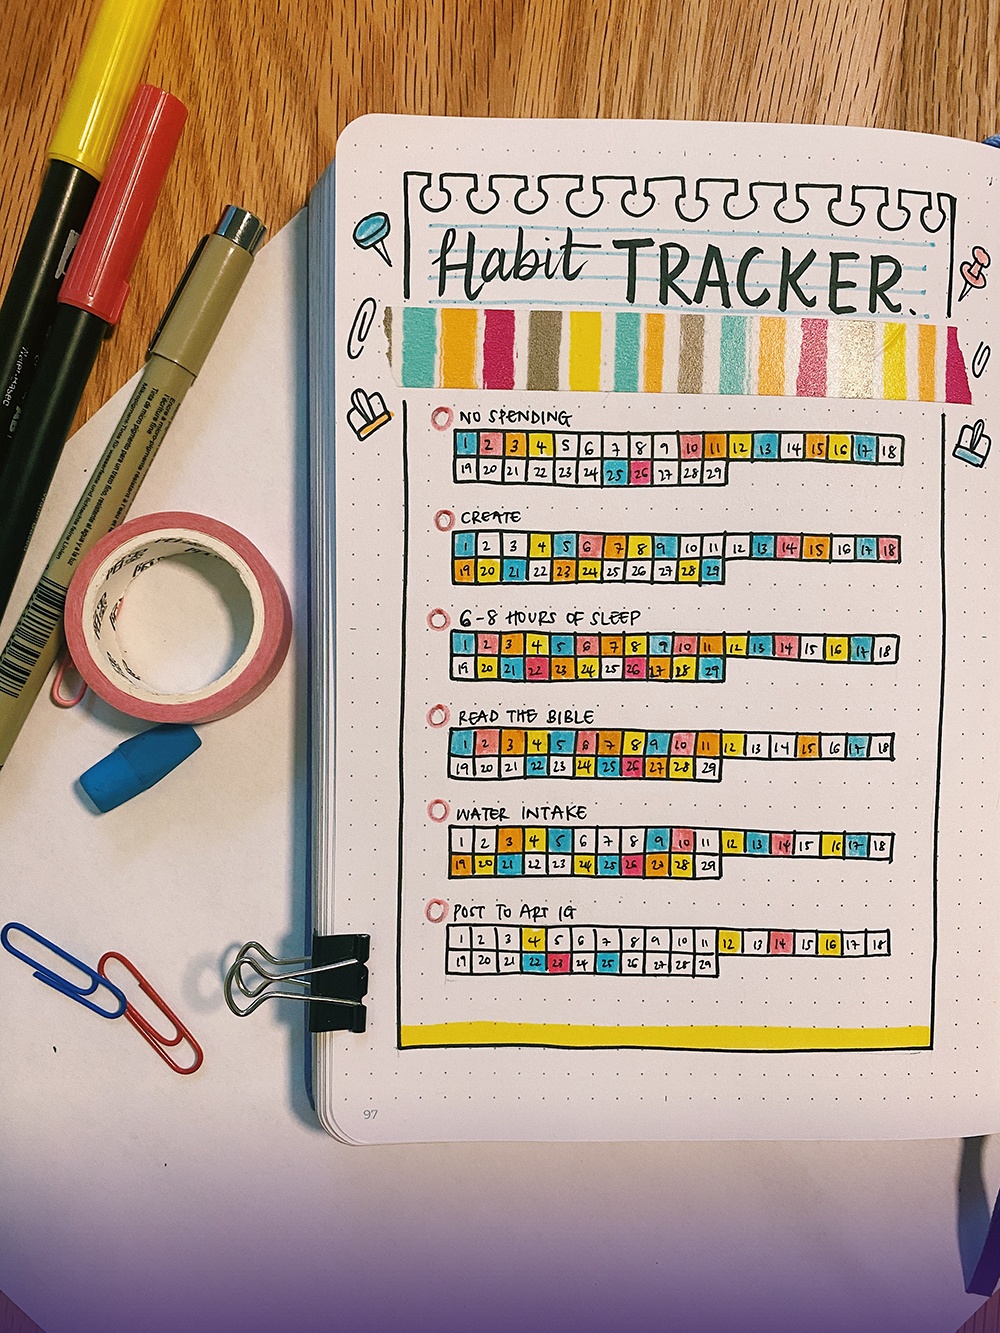 Completed Habit Tracker